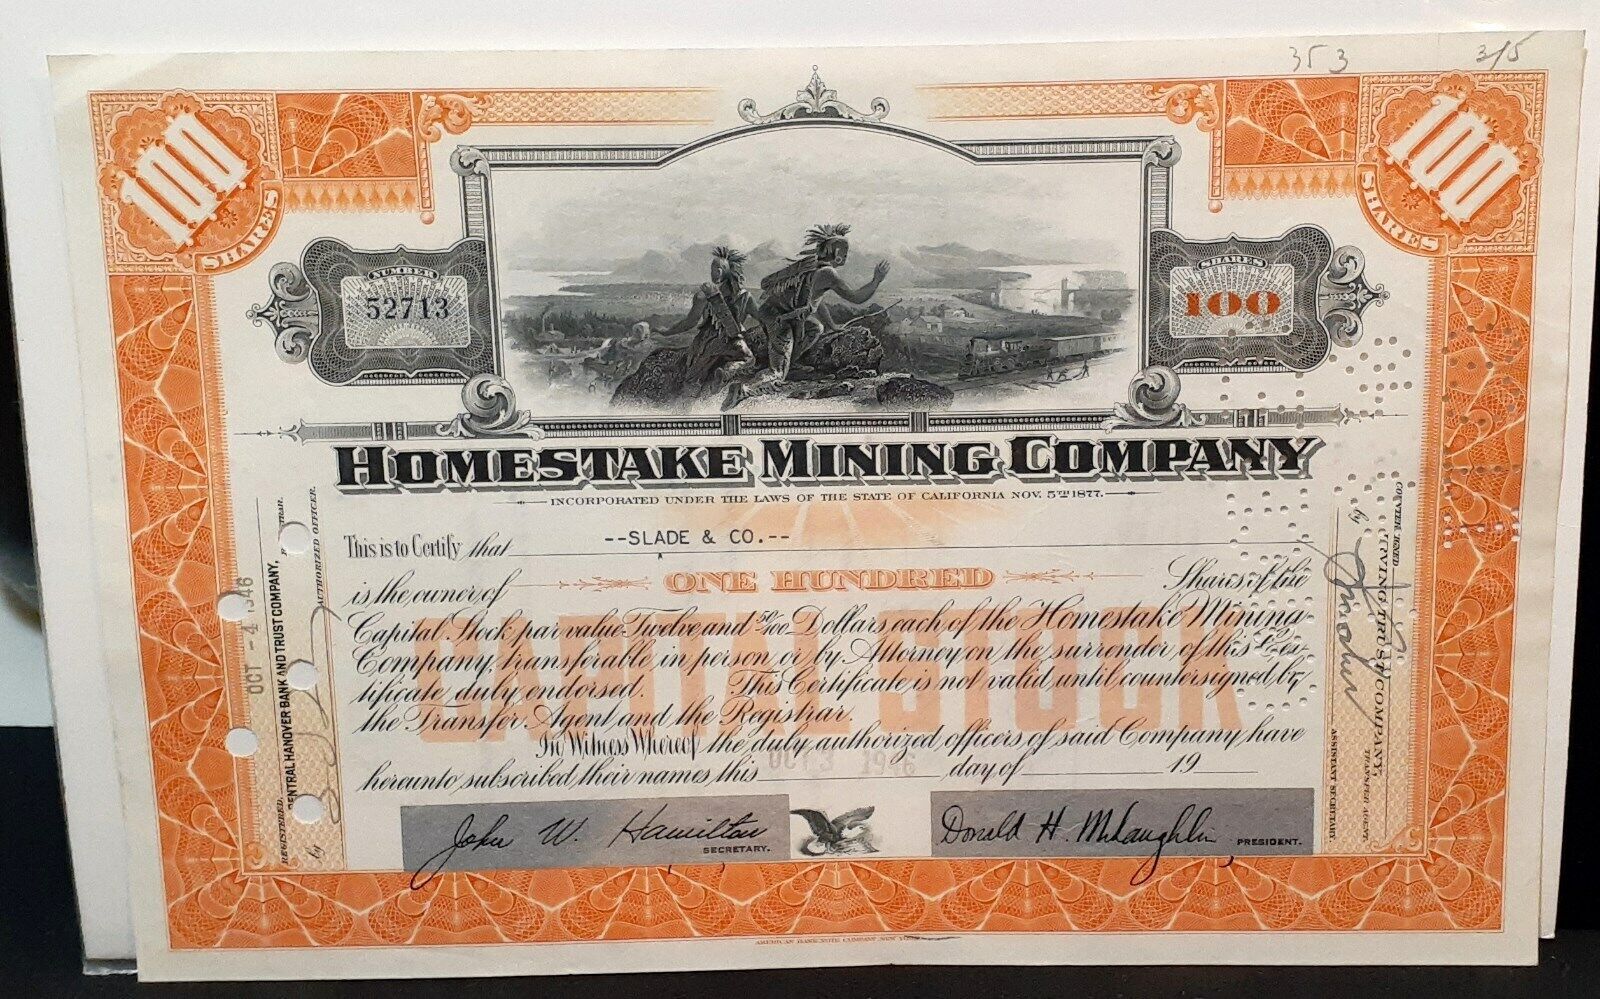 Homestake Mining Company Issued Capital Stock Certificate - Number 52713